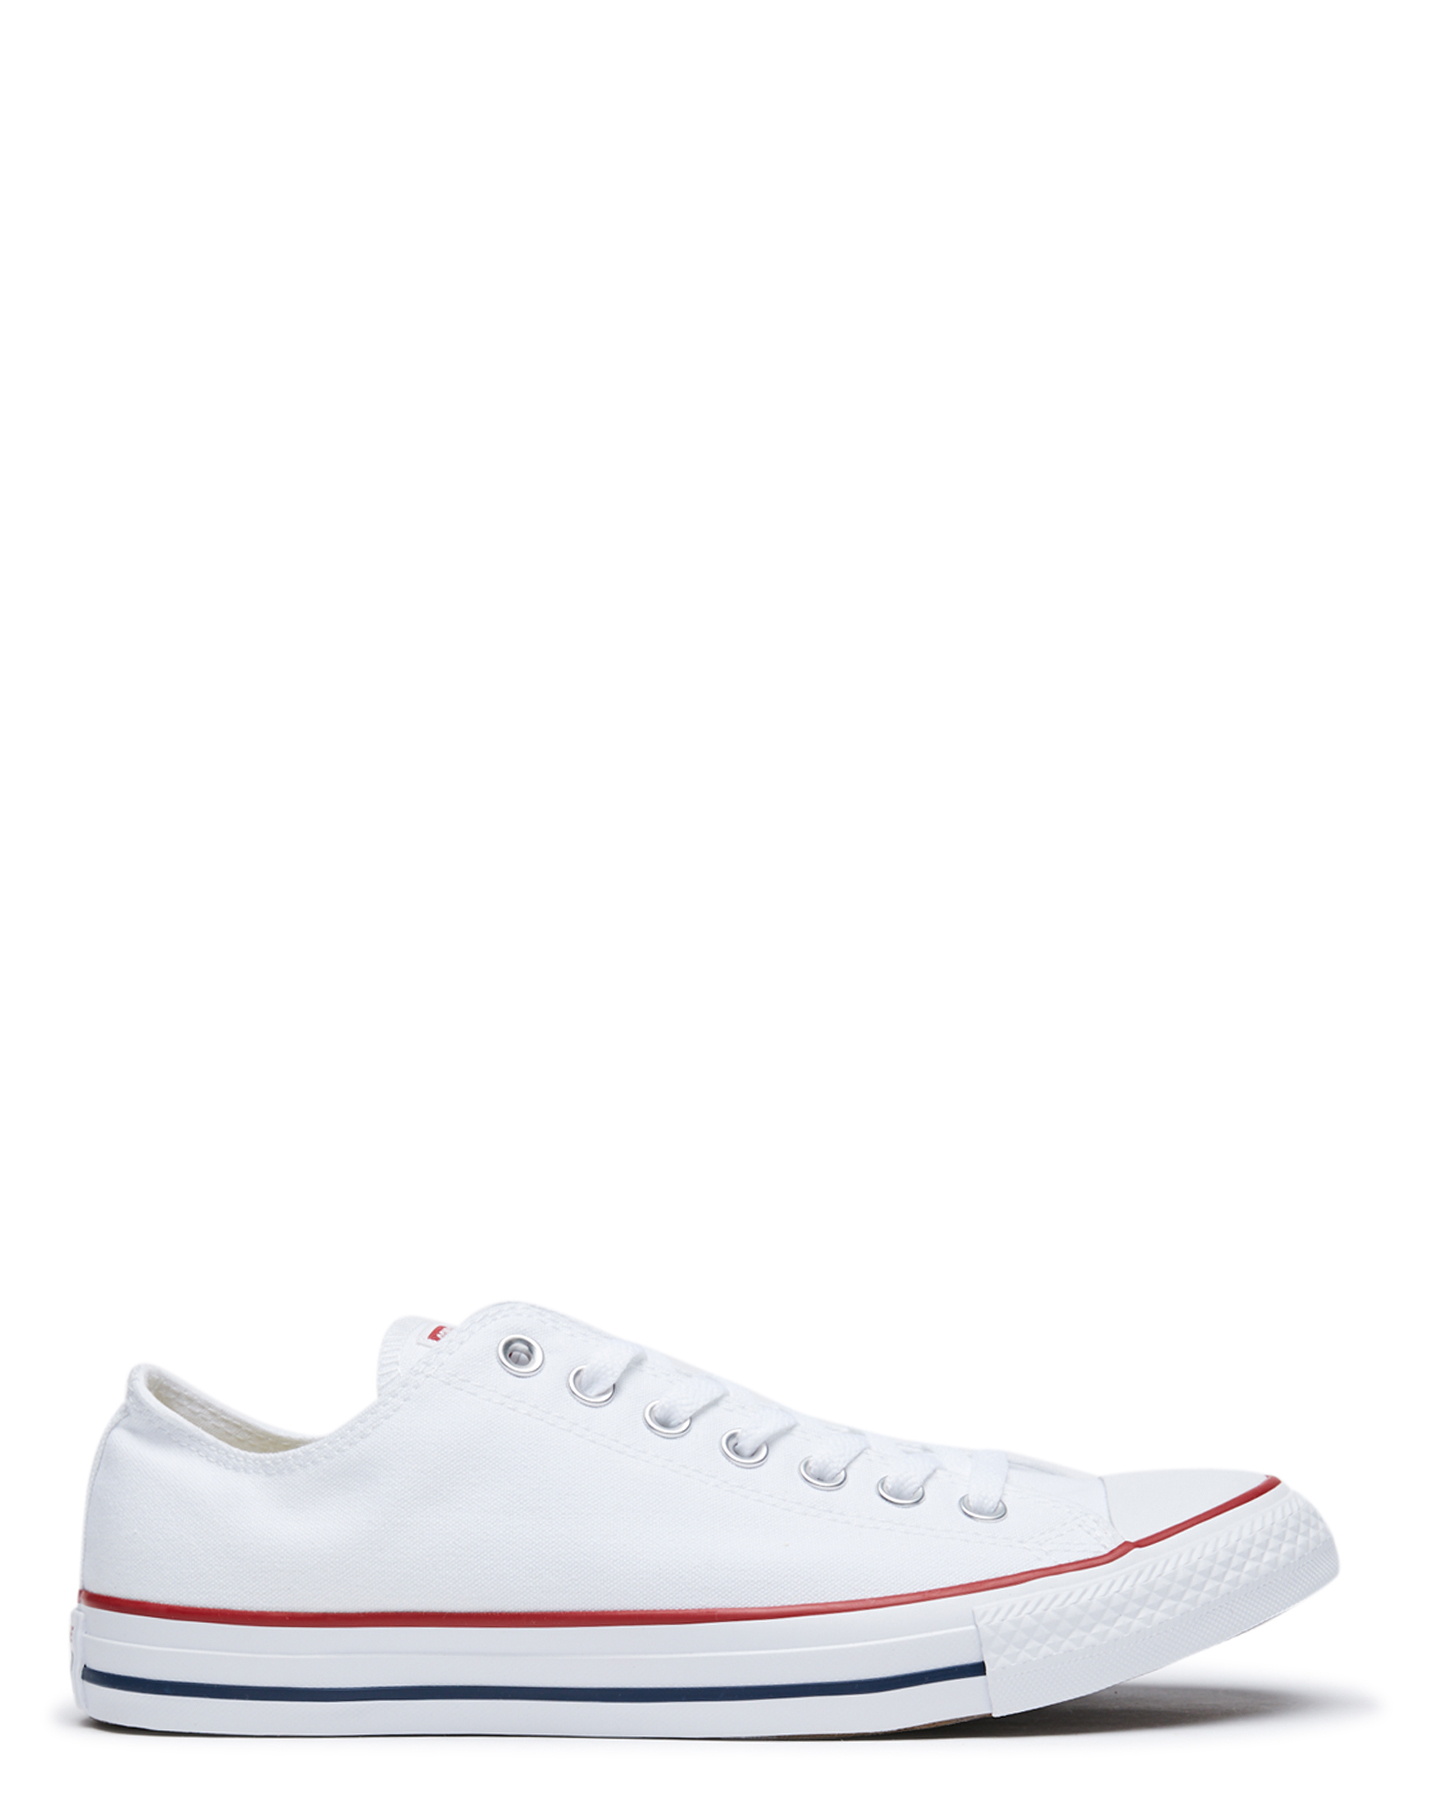 converse shoes for cheap